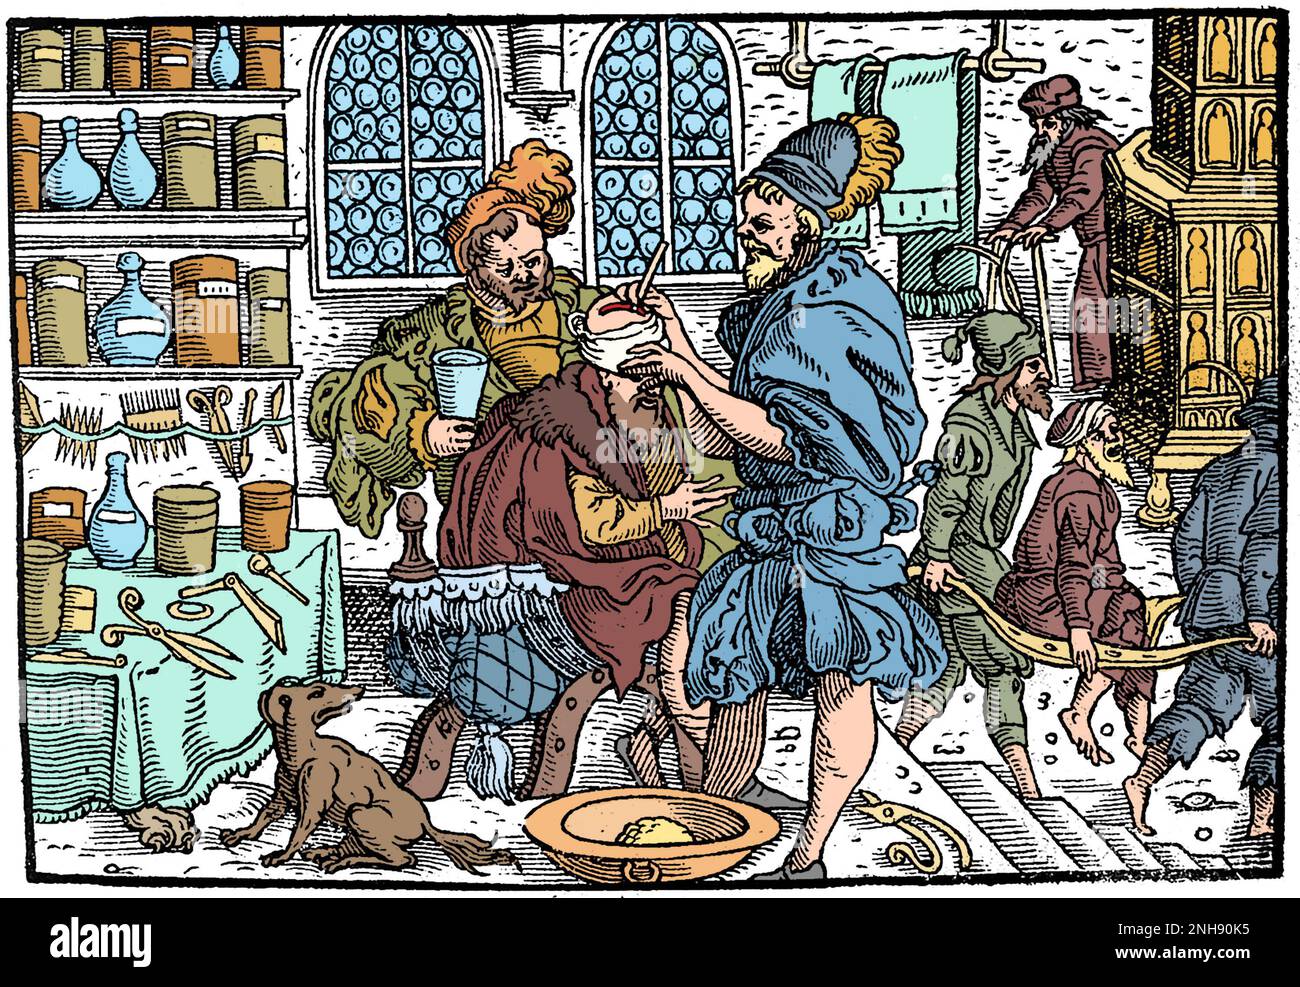 Paracelsus operating on a man's head. Paracelsus (1493-1541), born Theophrastus von Hohenheim, was a Swiss physician, alchemist, lay theologian, and philosopher of the German Renaissance, known as the father of toxicology. From Der ander Theyl der grossen, circa 1560s. Colorized. Stock Photo